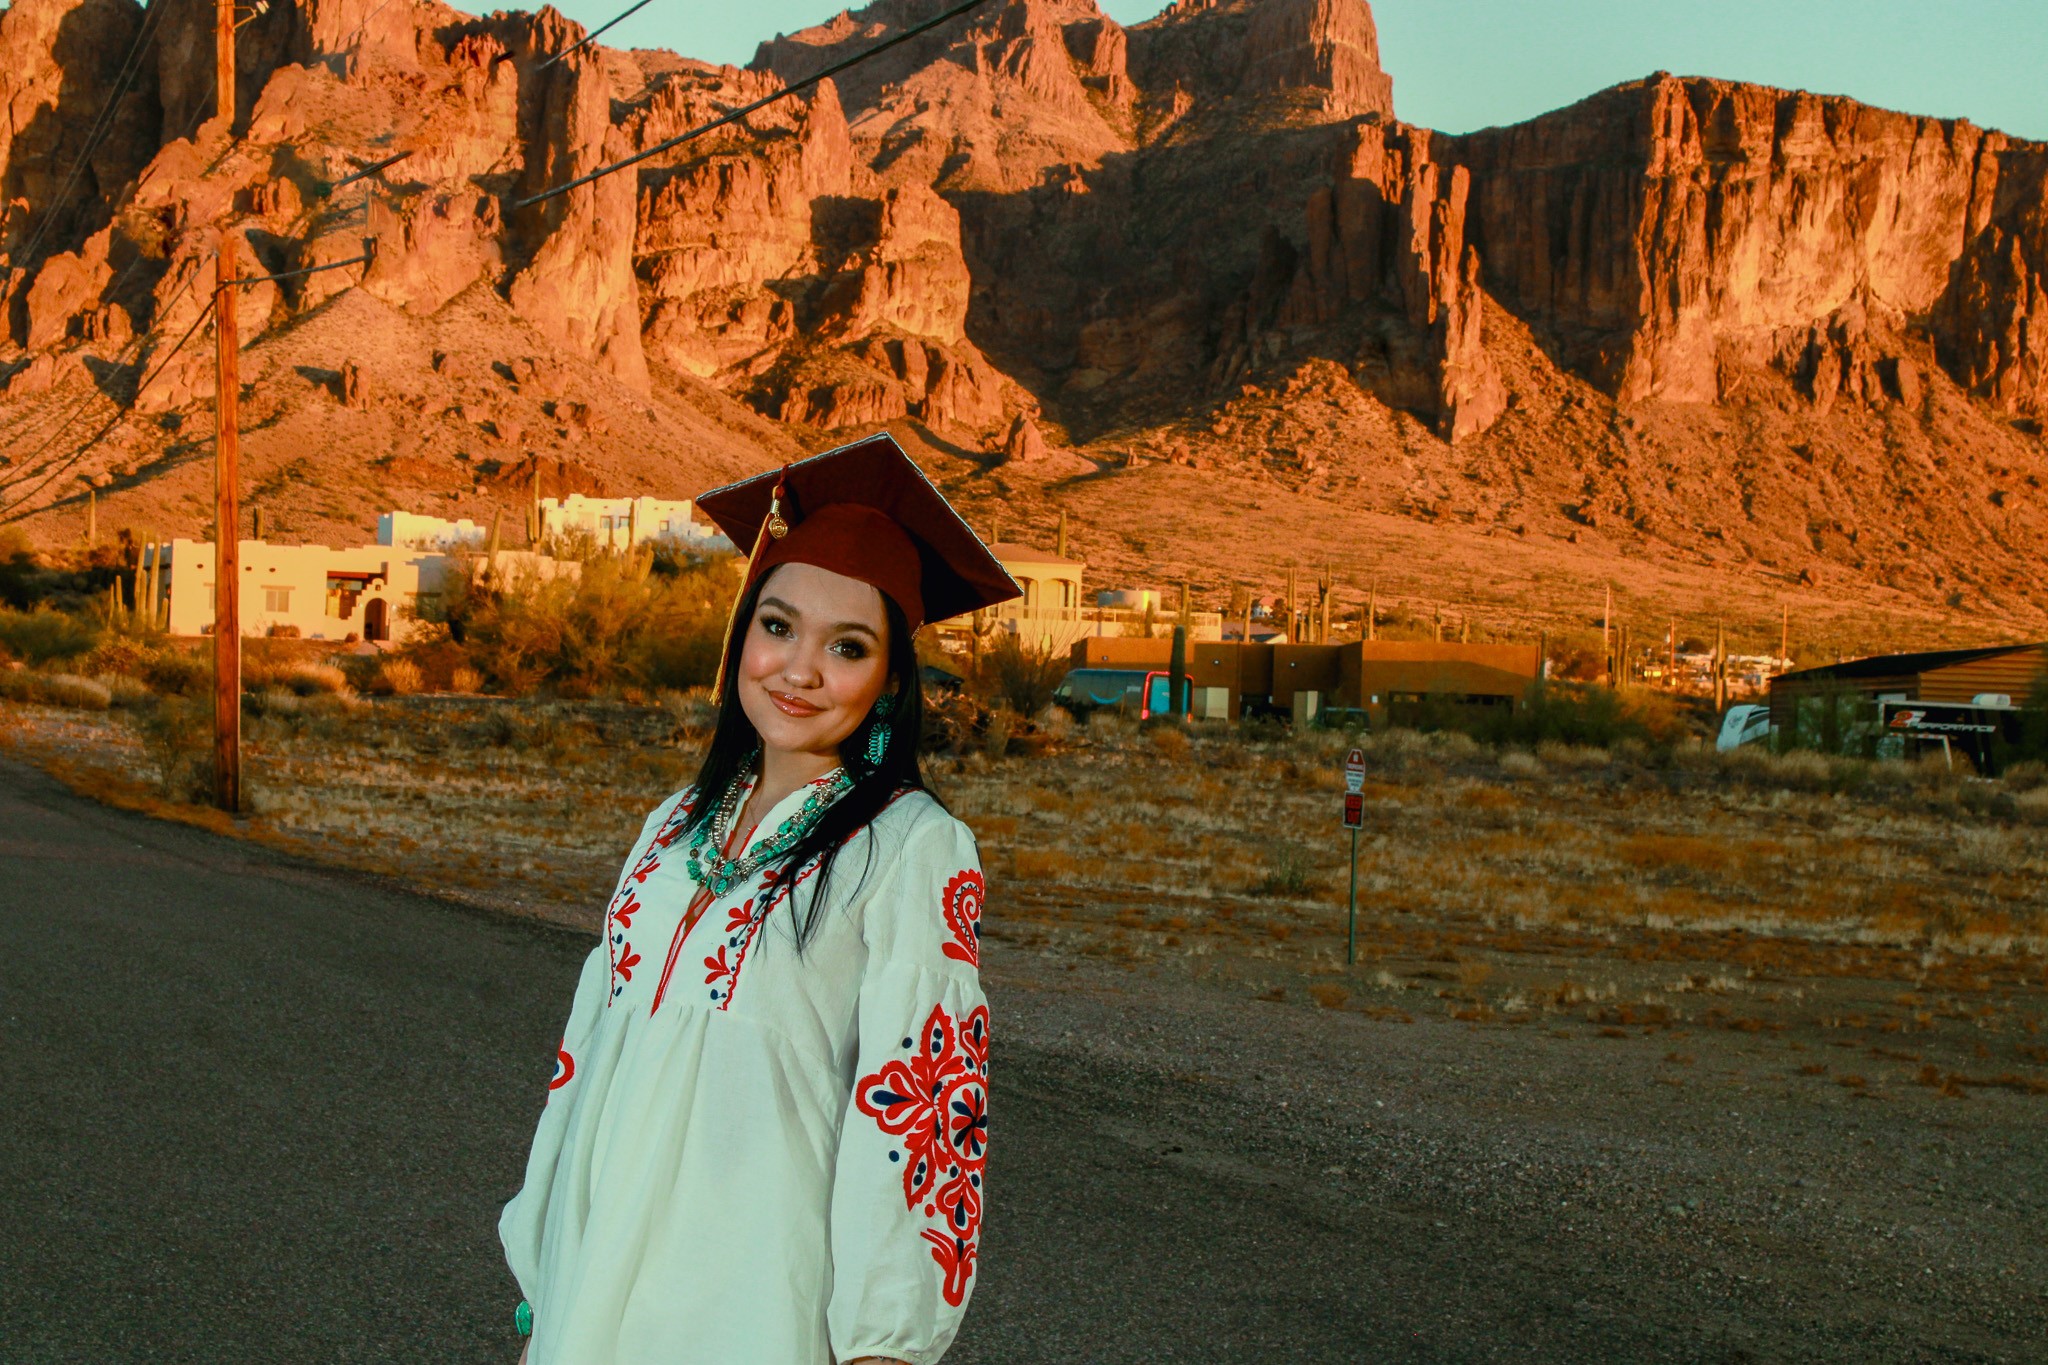  smiles at the camera wearing her ASU graduation cap and a white shirt with red flowers on the sleeves. A mountain range can be seen in the background